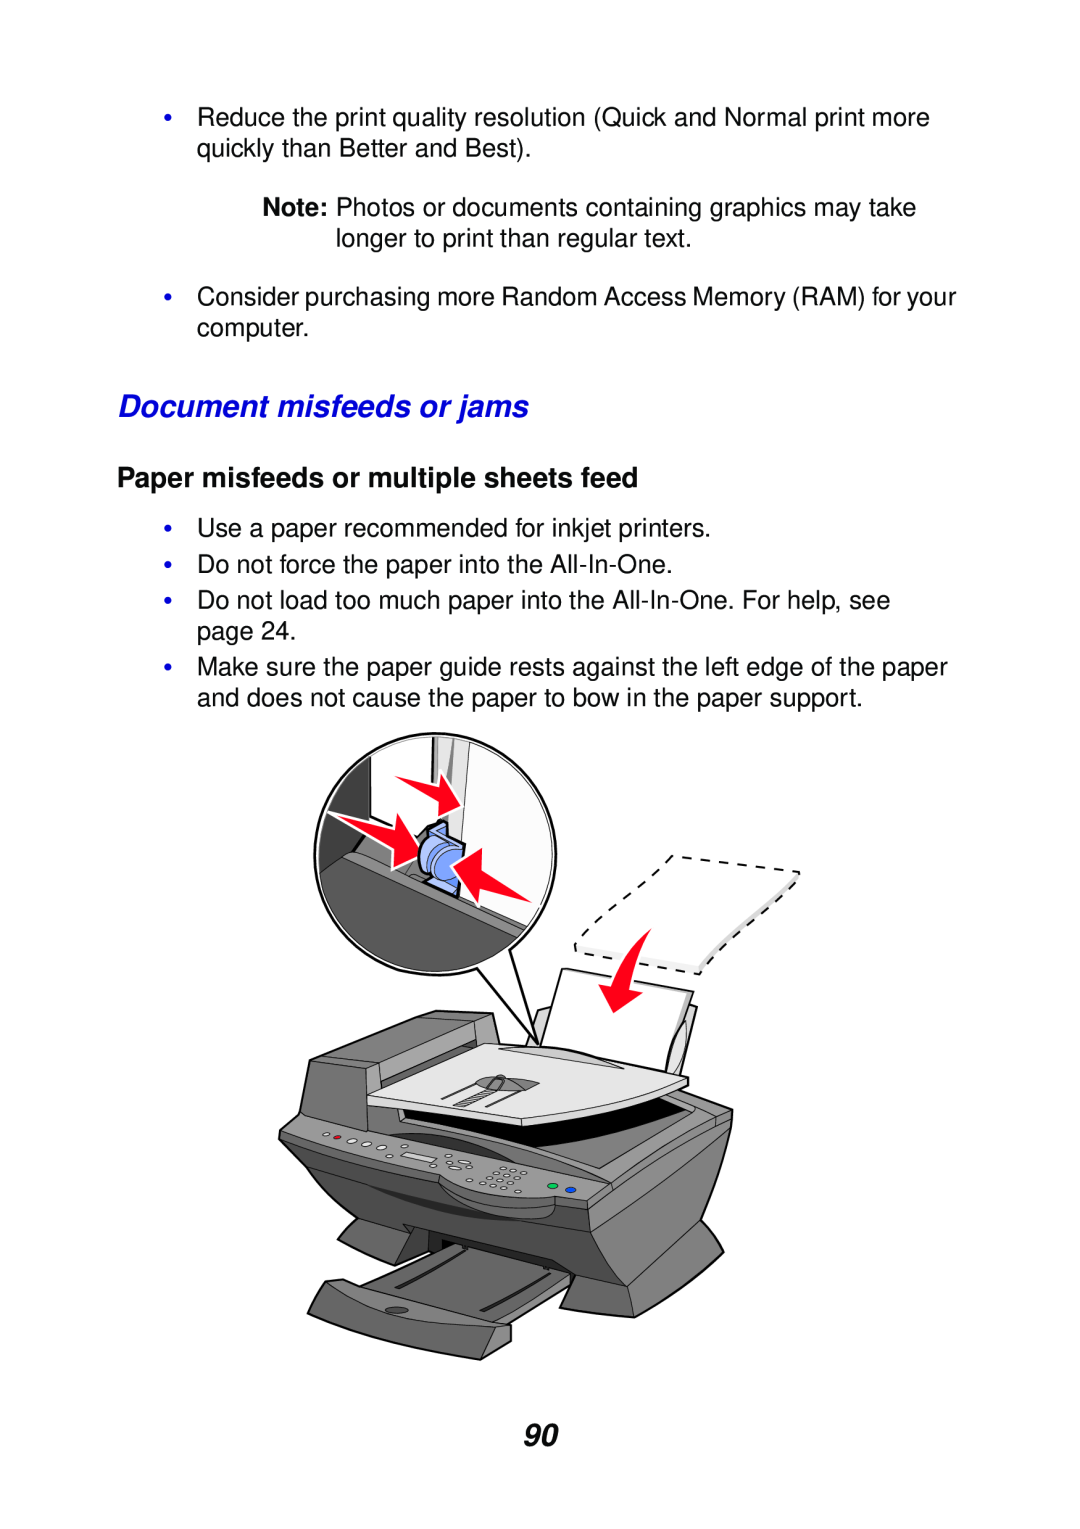 Lexmark X6100 manual Document misfeeds or jams, Paper misfeeds or multiple sheets feed 